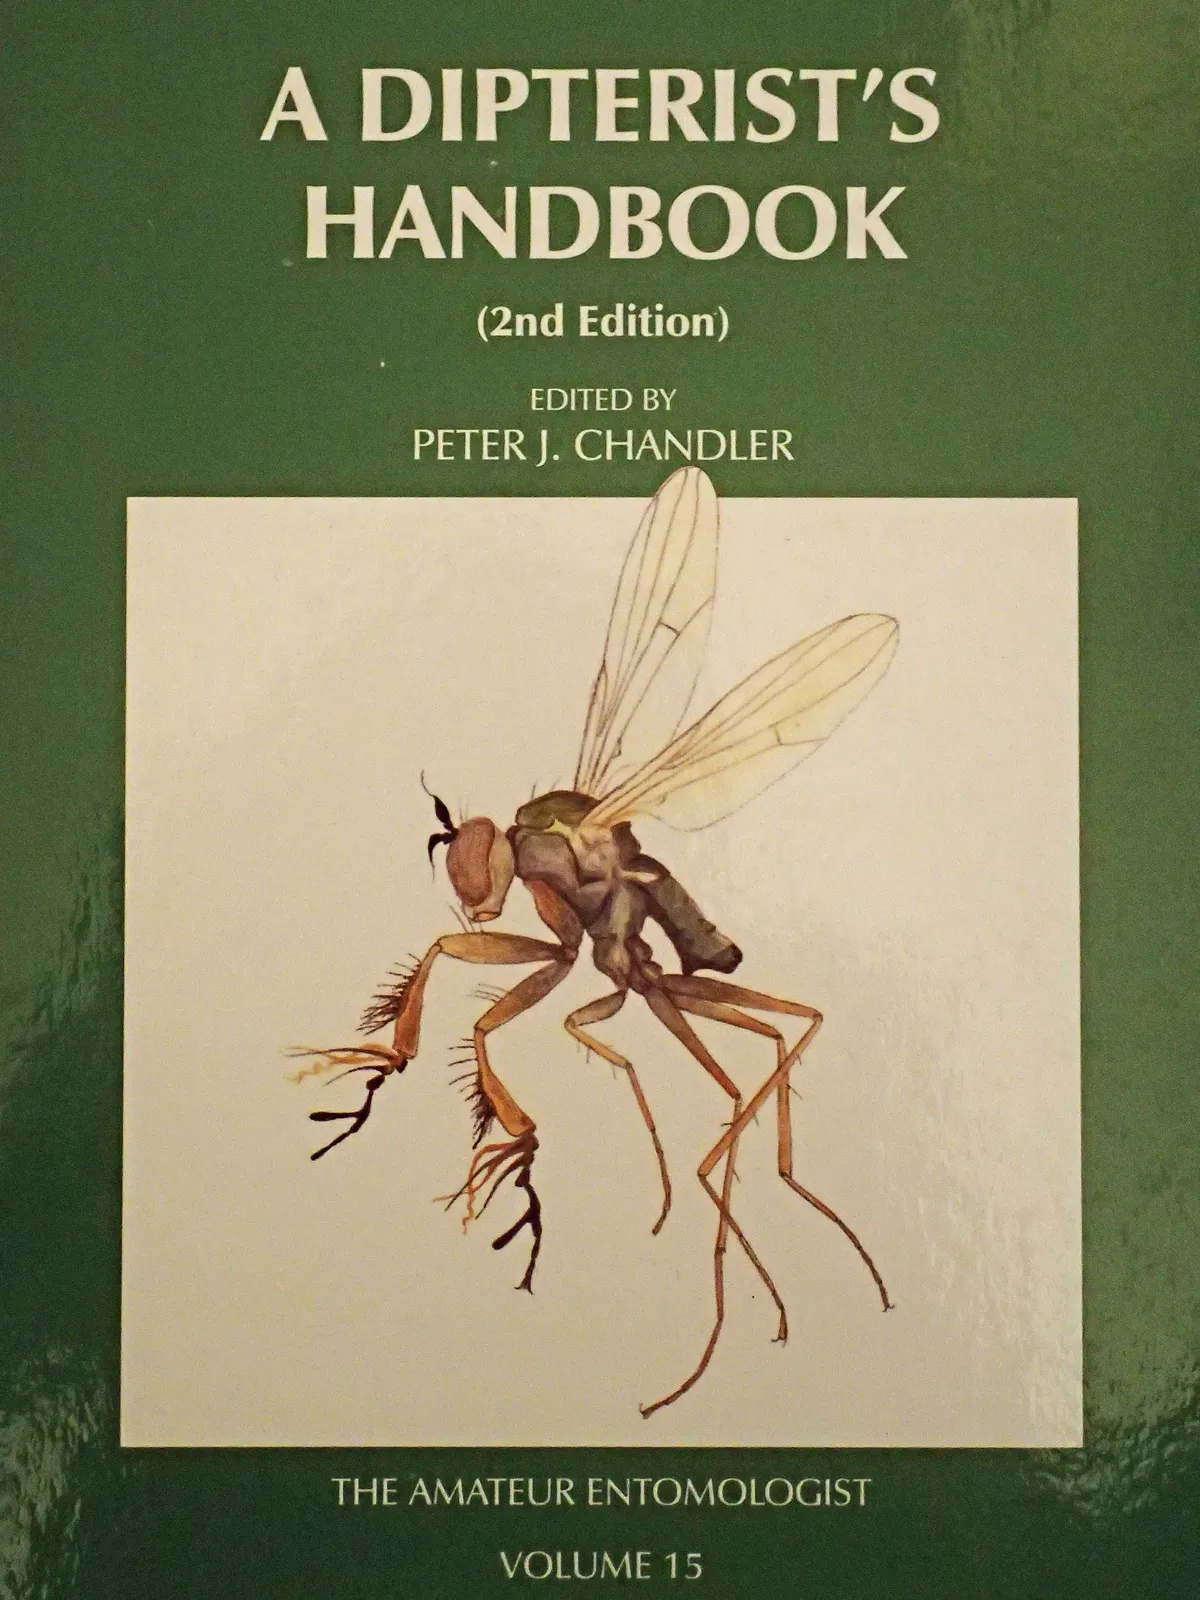 The Front cover of A Dipterists Handbook, featuring Peter Skidmore’s wonderful drawing of Campsicnemus magius